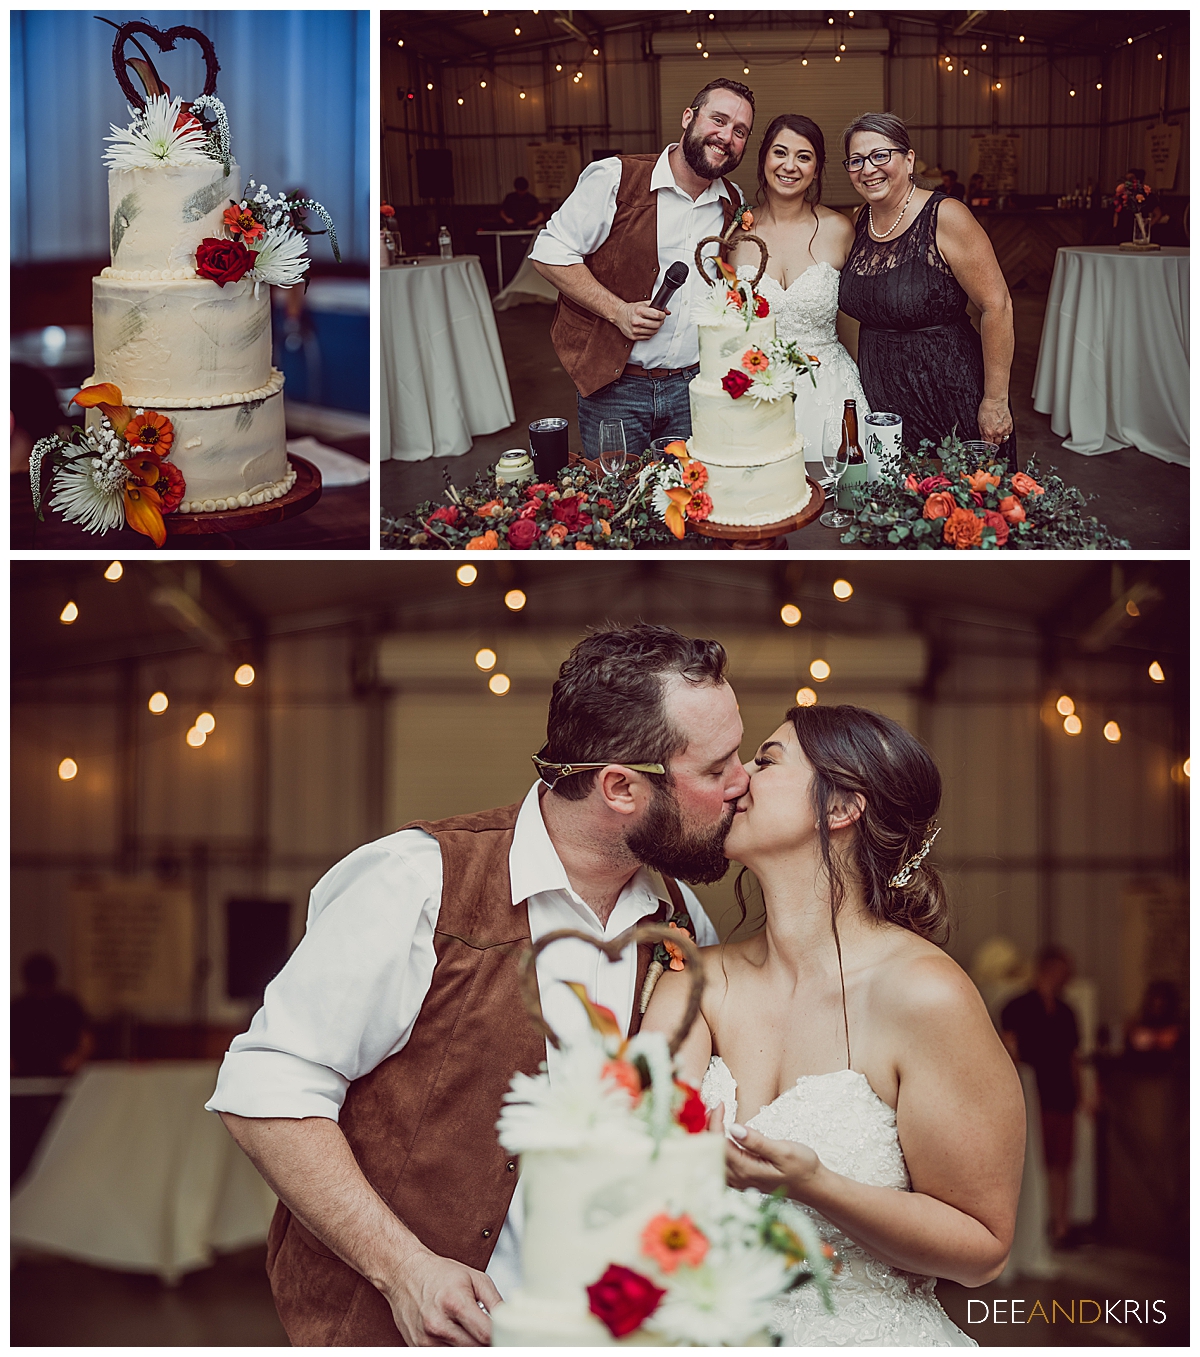 Three images of the wedding cake, the baker, and the bride and groom kissing.